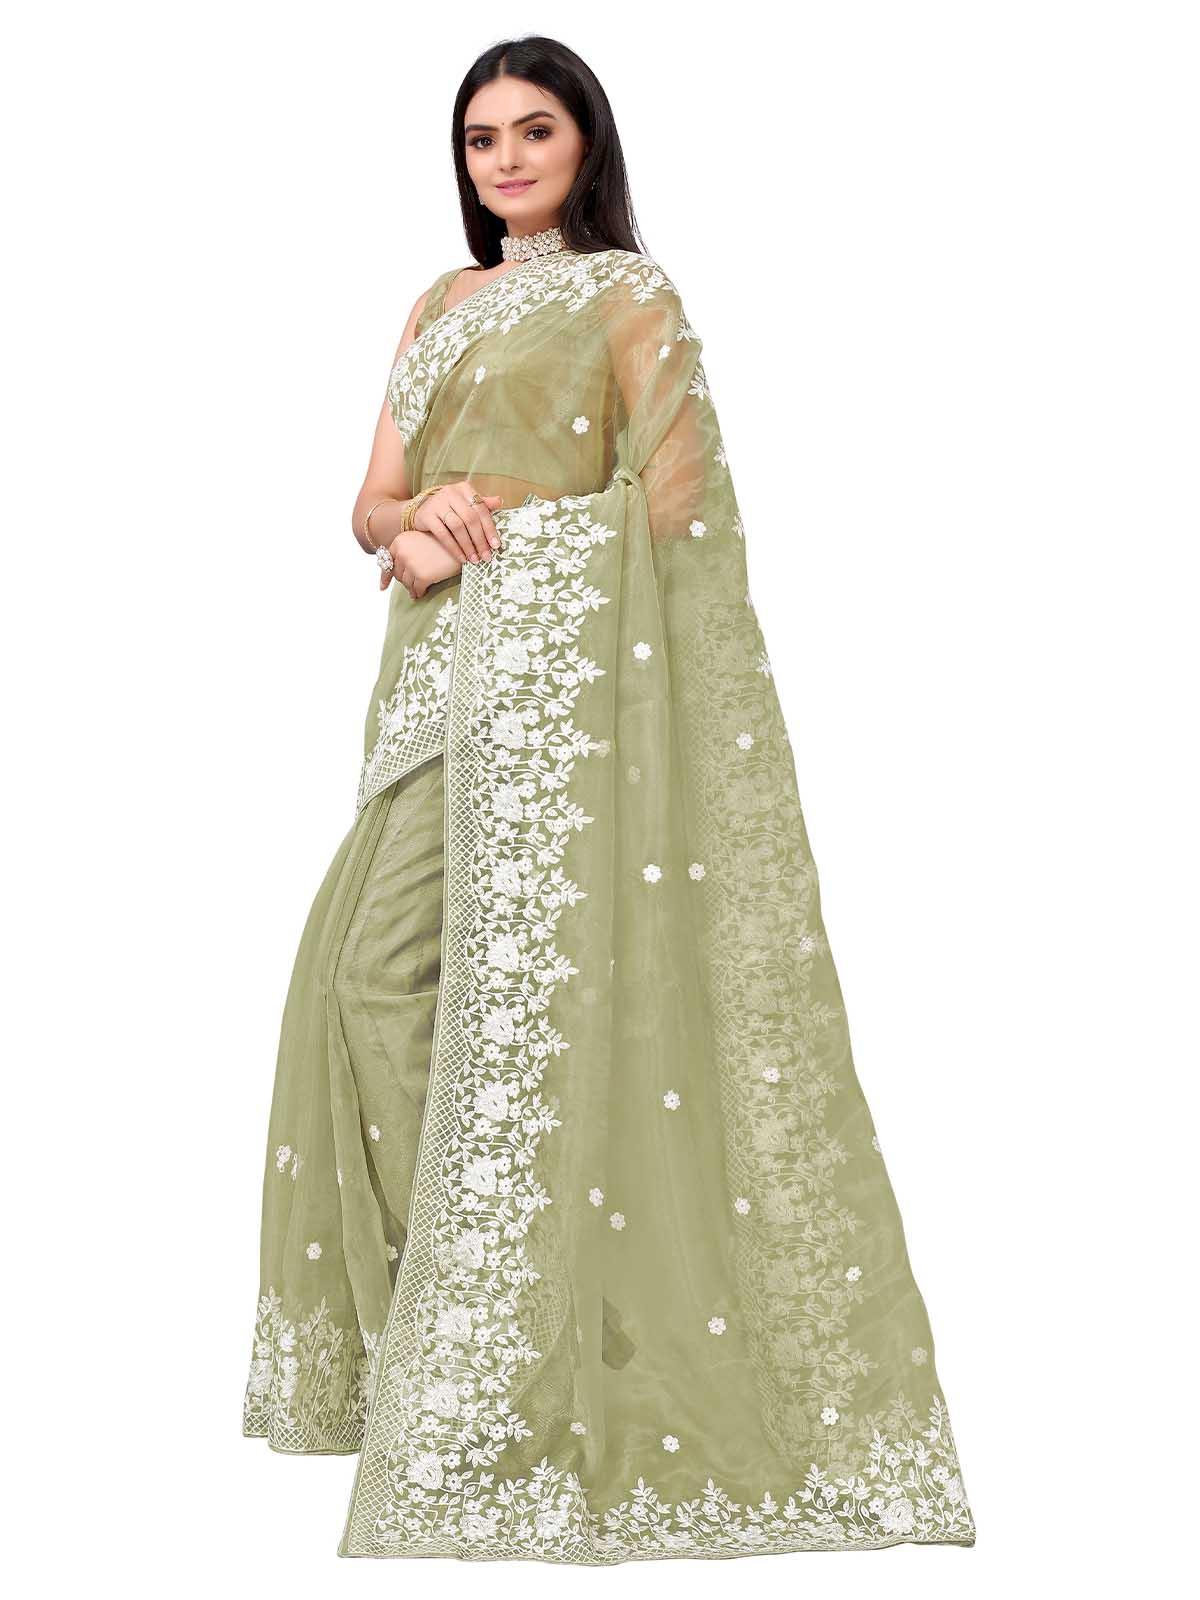 Women's Olive Organza Embroidered Saree With Blouse - Odette